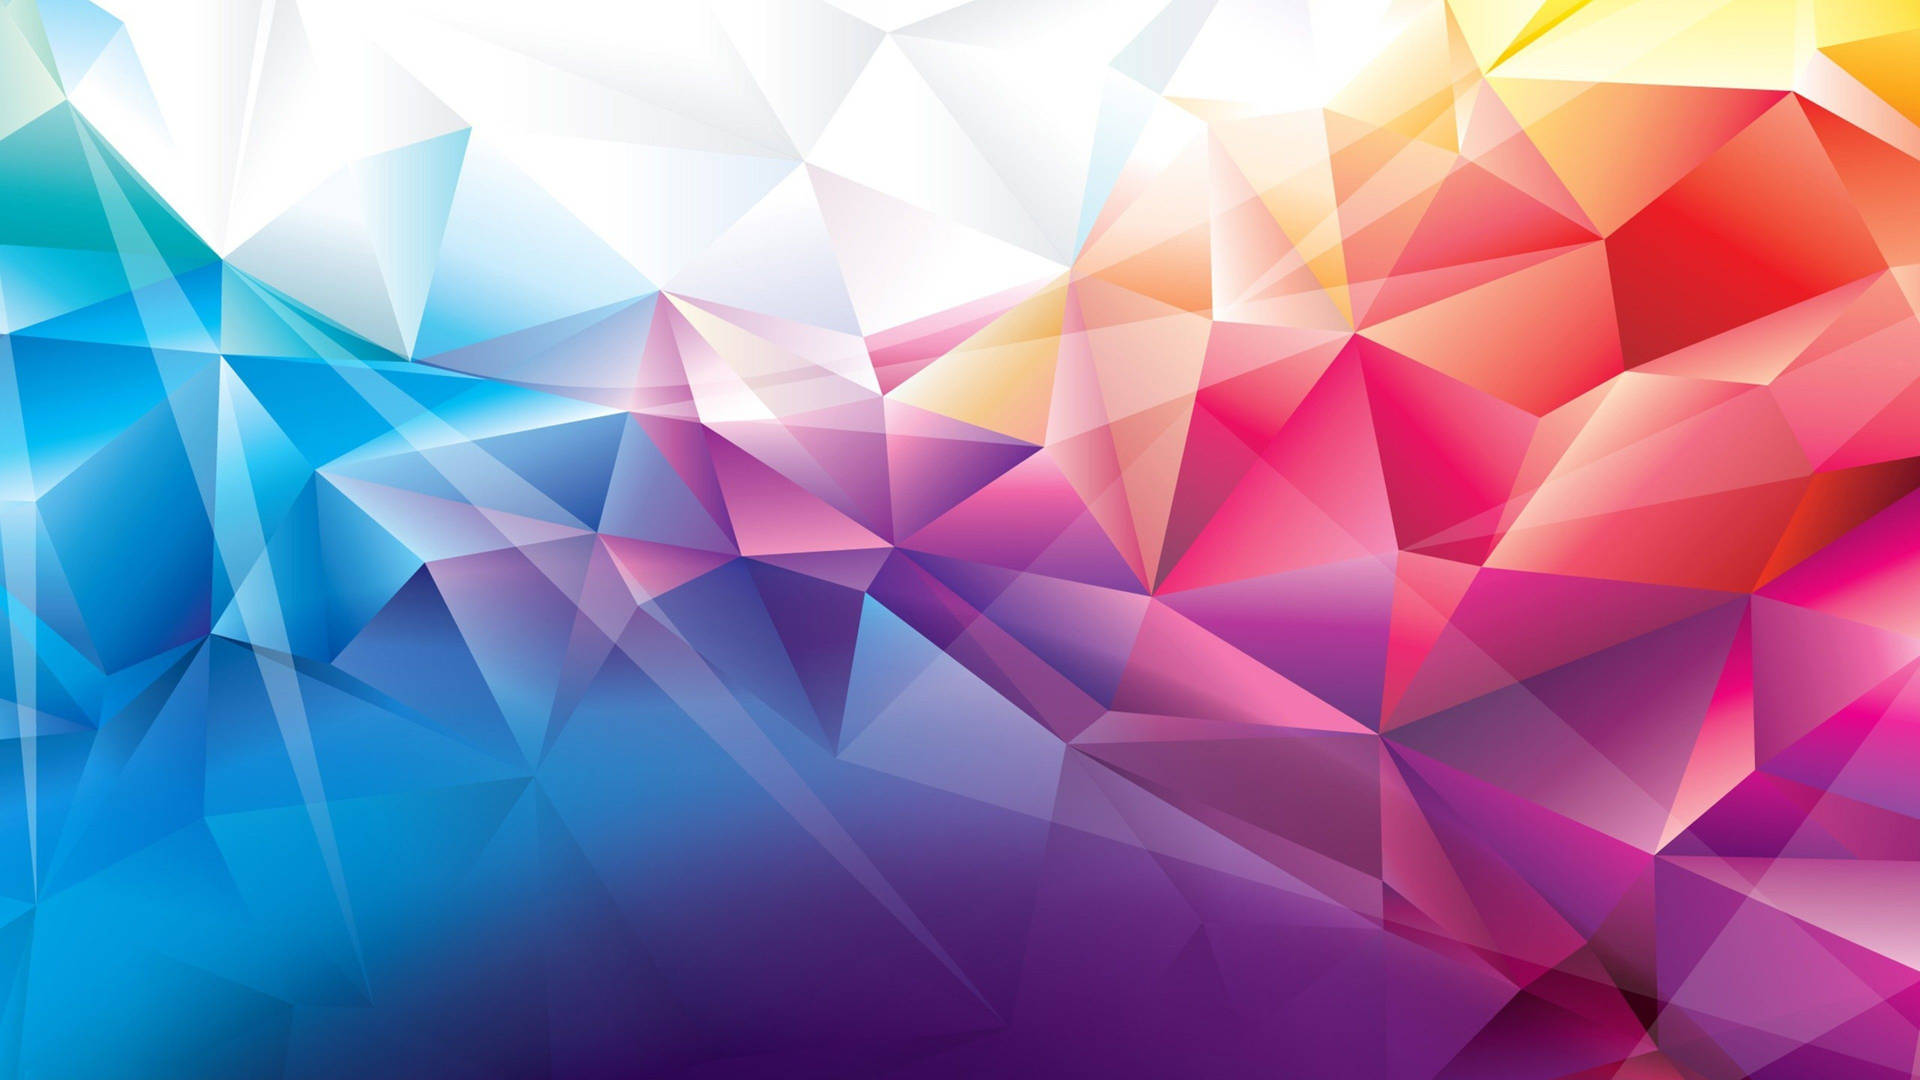 Colorful Abstract Geometric Polygons Background